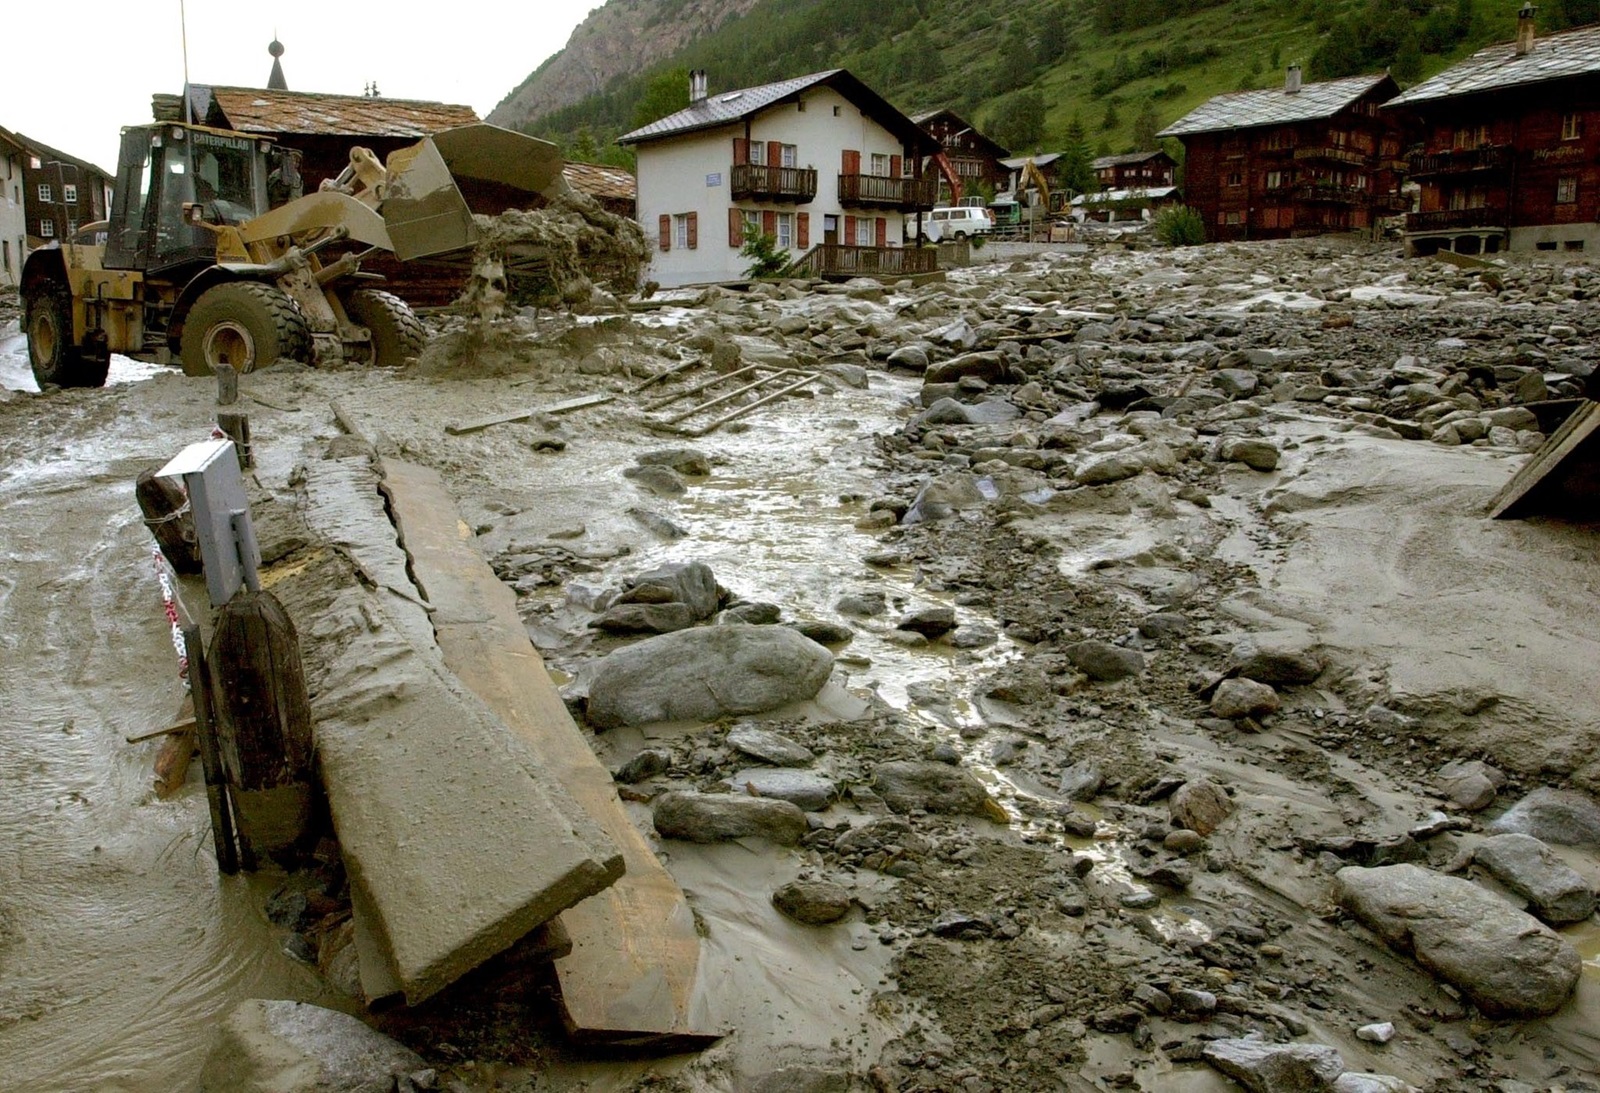 Heavy machinery (L) is used to clear the debris and rubble in overflooded parts of the village of Taesch, near Zermatt, Switzerland, 26 June 2001. An avalanche caused the lake Weingartensee, situated above Taesch, to overflow, spilling water and debris into the village late yesterday evening. Some 150 people were evacuated temporarily.,Image: 69127525, License: Rights-managed, Restrictions: , Model Release: no, Credit line: ANDREE-NOELLE POT / AFP / Profimedia